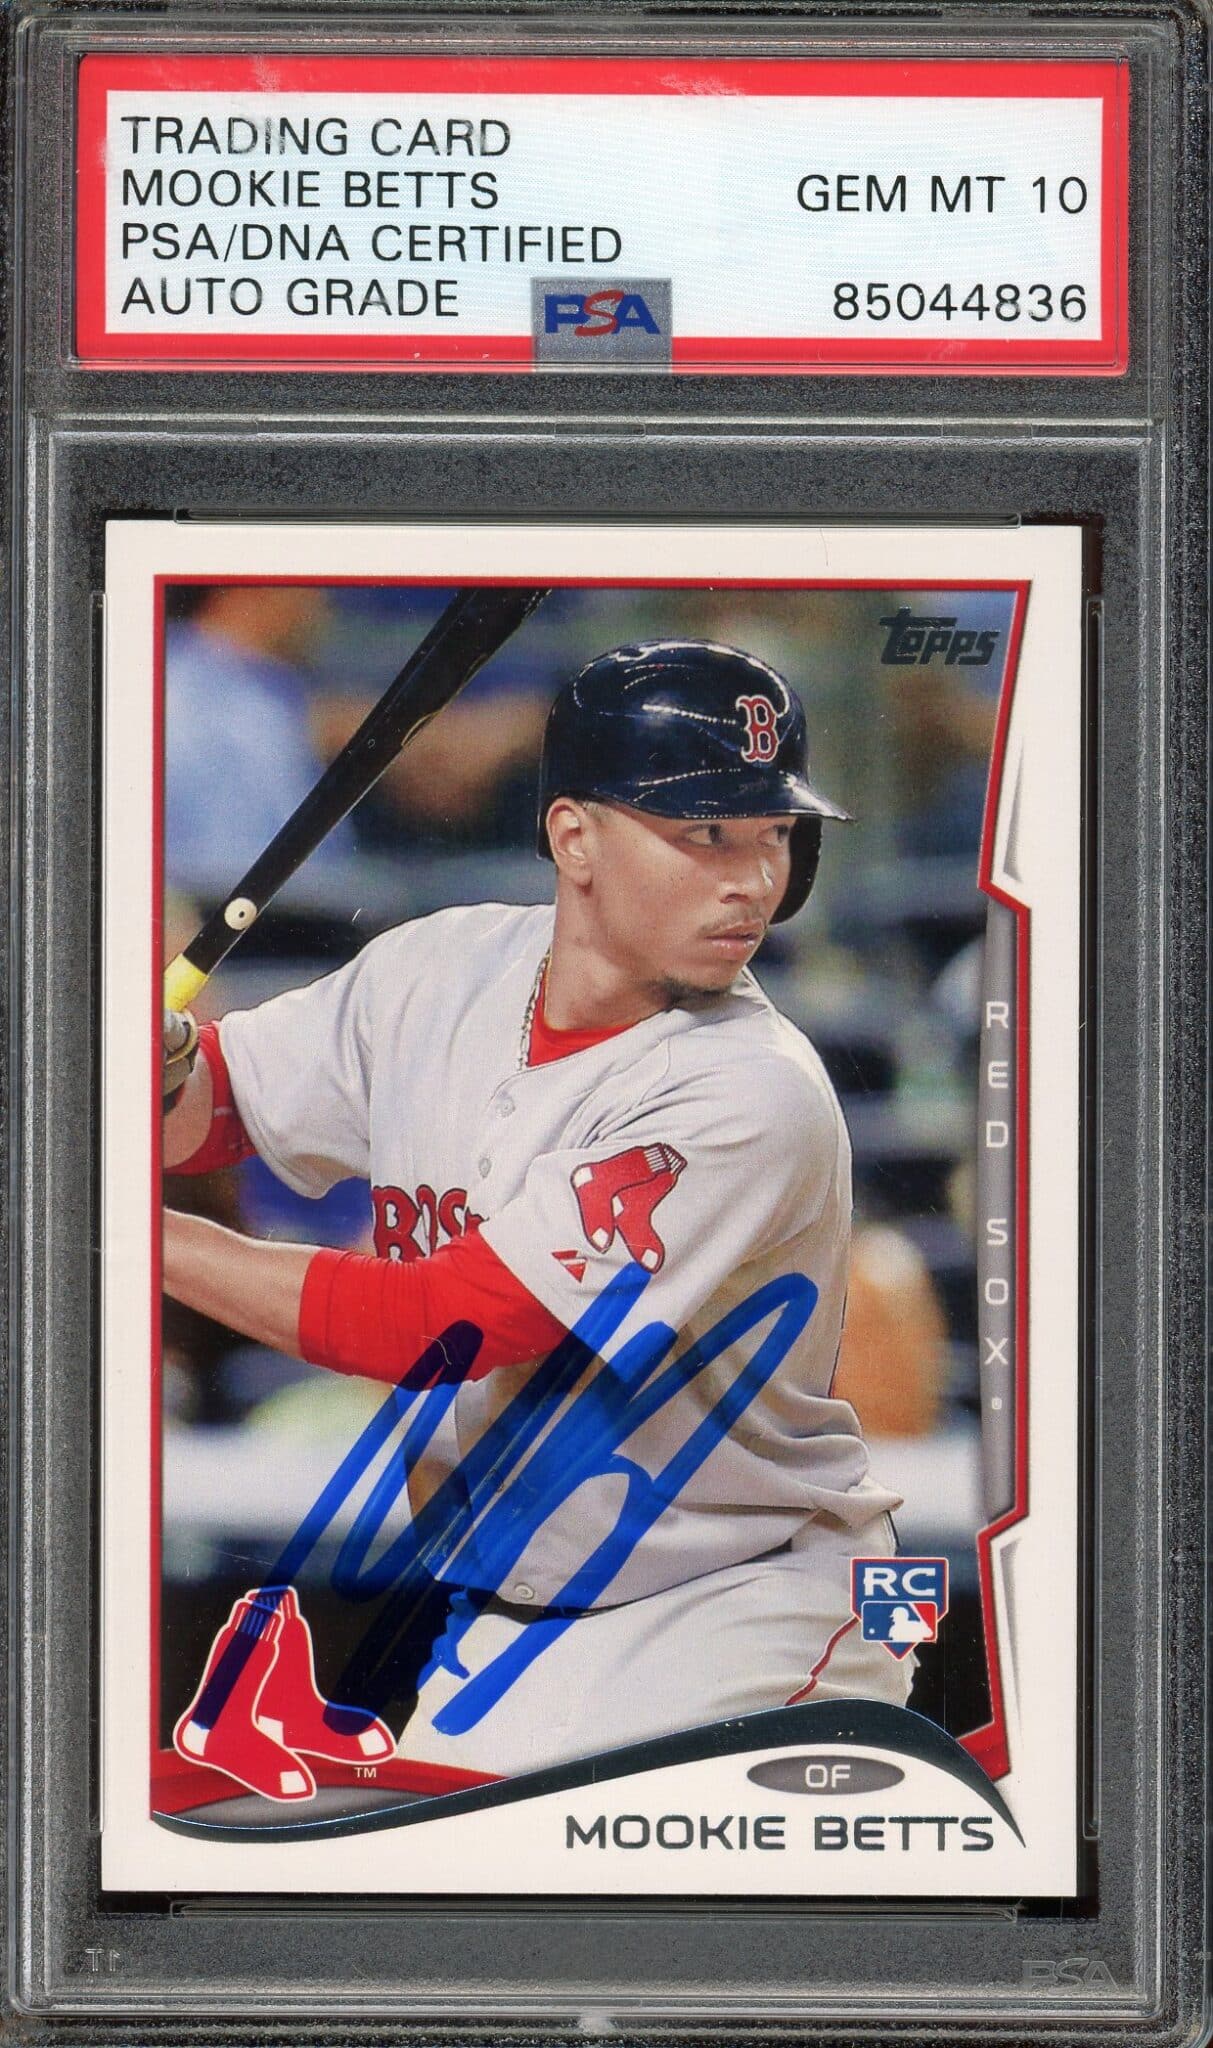 Sold at Auction: 2013 Panini Prizm Draft Mookie Betts Rookie Card